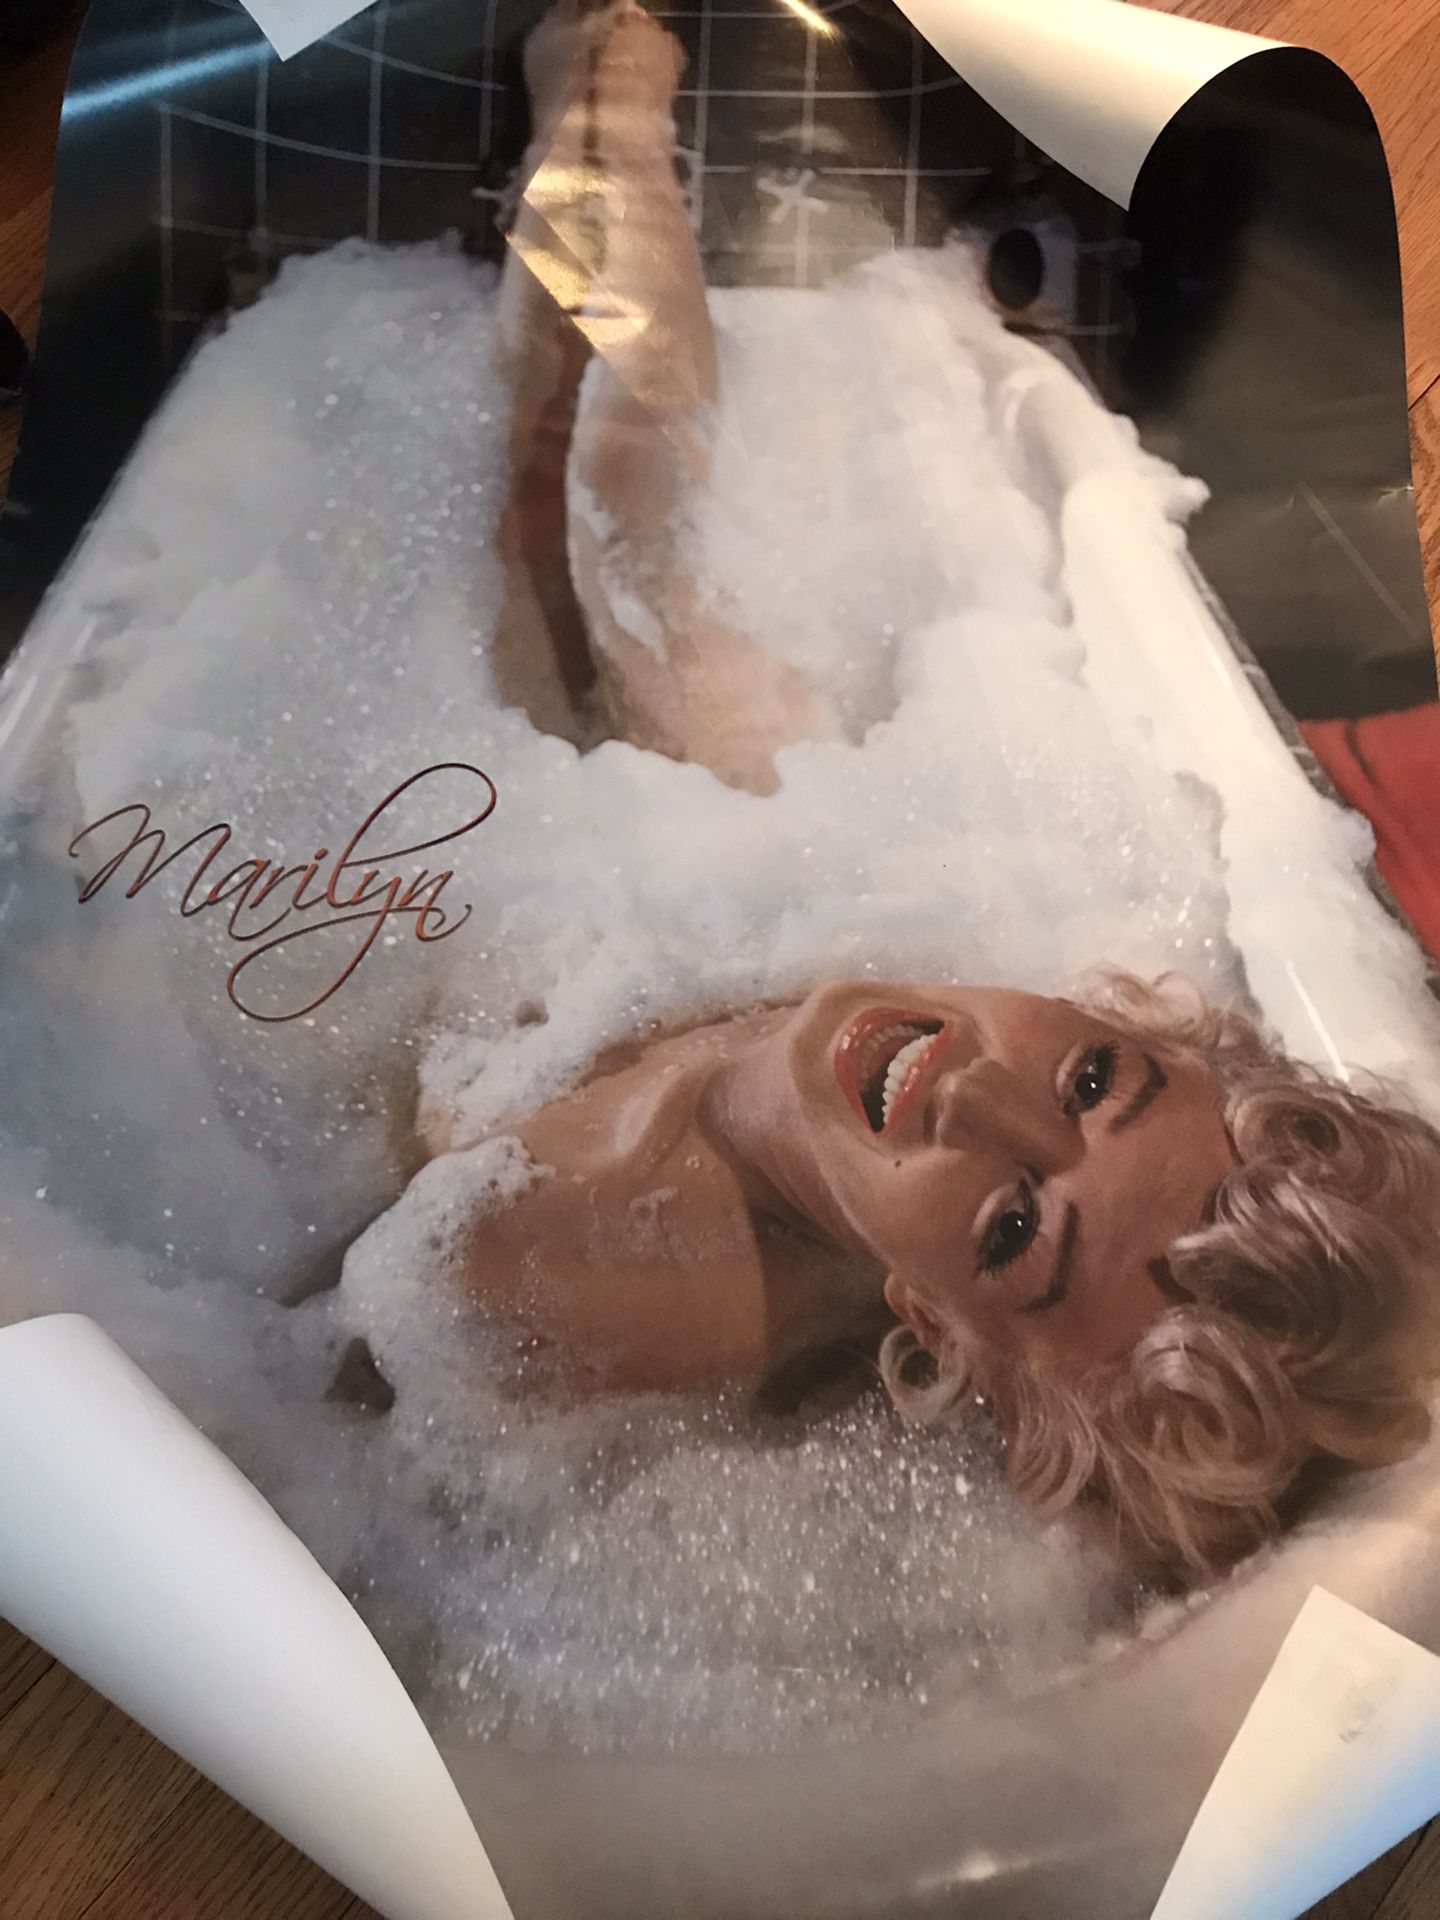 Marilyn Monroe Posters With Free Calendar